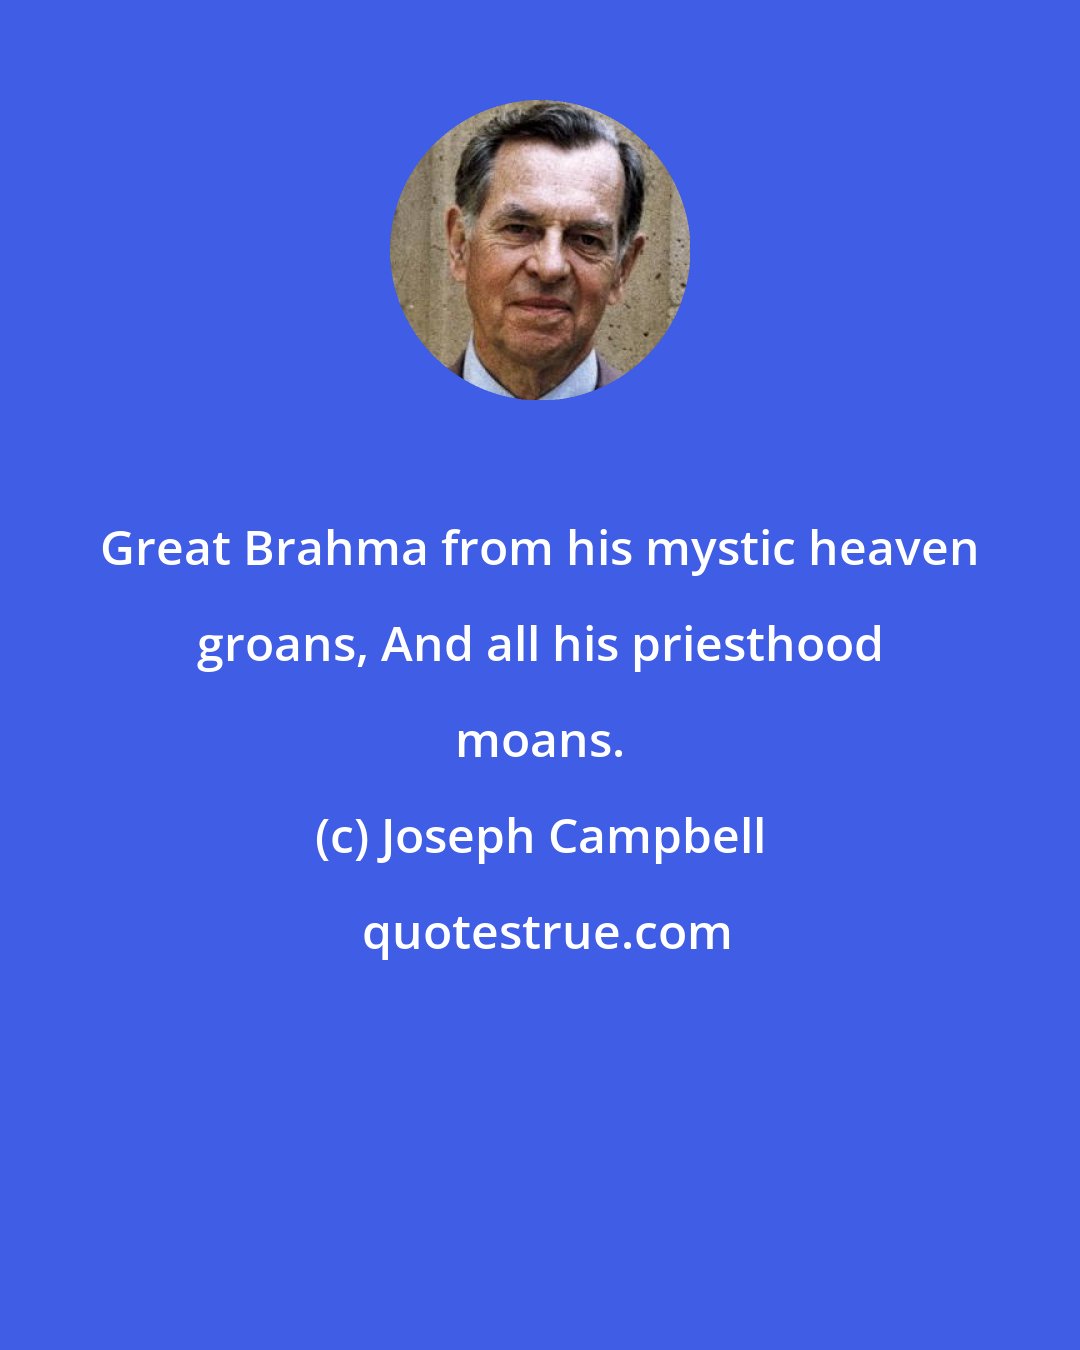 Joseph Campbell: Great Brahma from his mystic heaven groans, And all his priesthood moans.